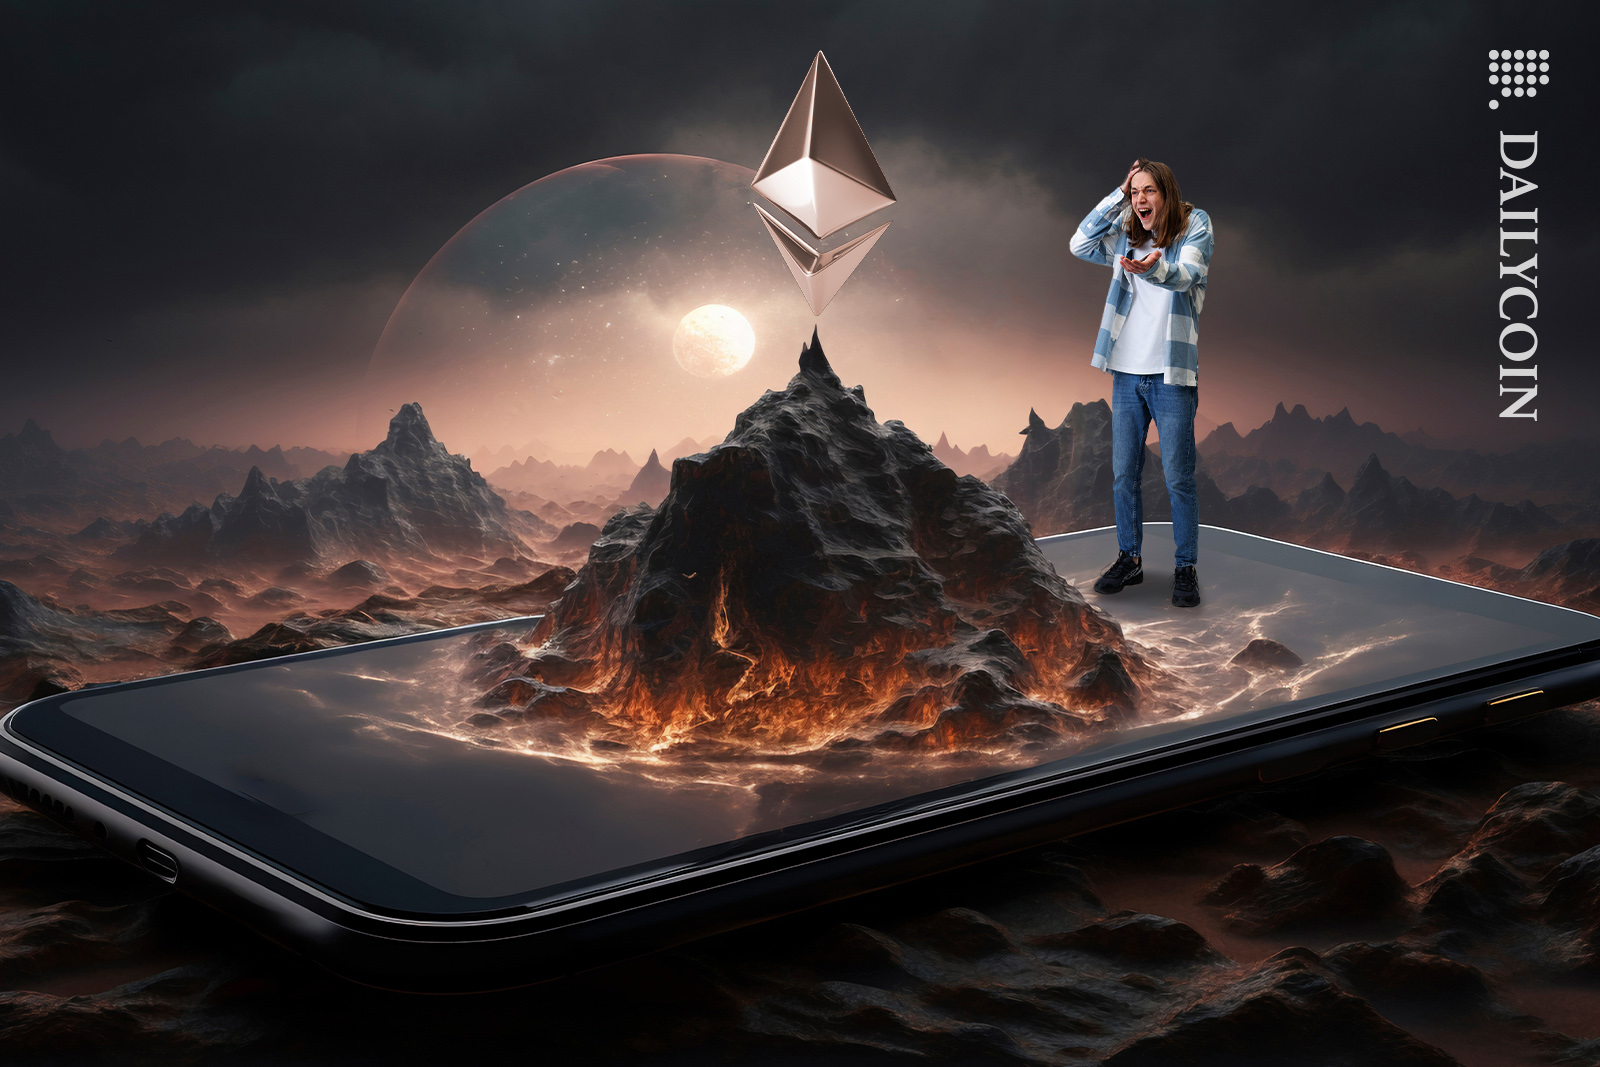 Man is wondering how is Ethereum is peaking so high, with a mountain coming out his phone.